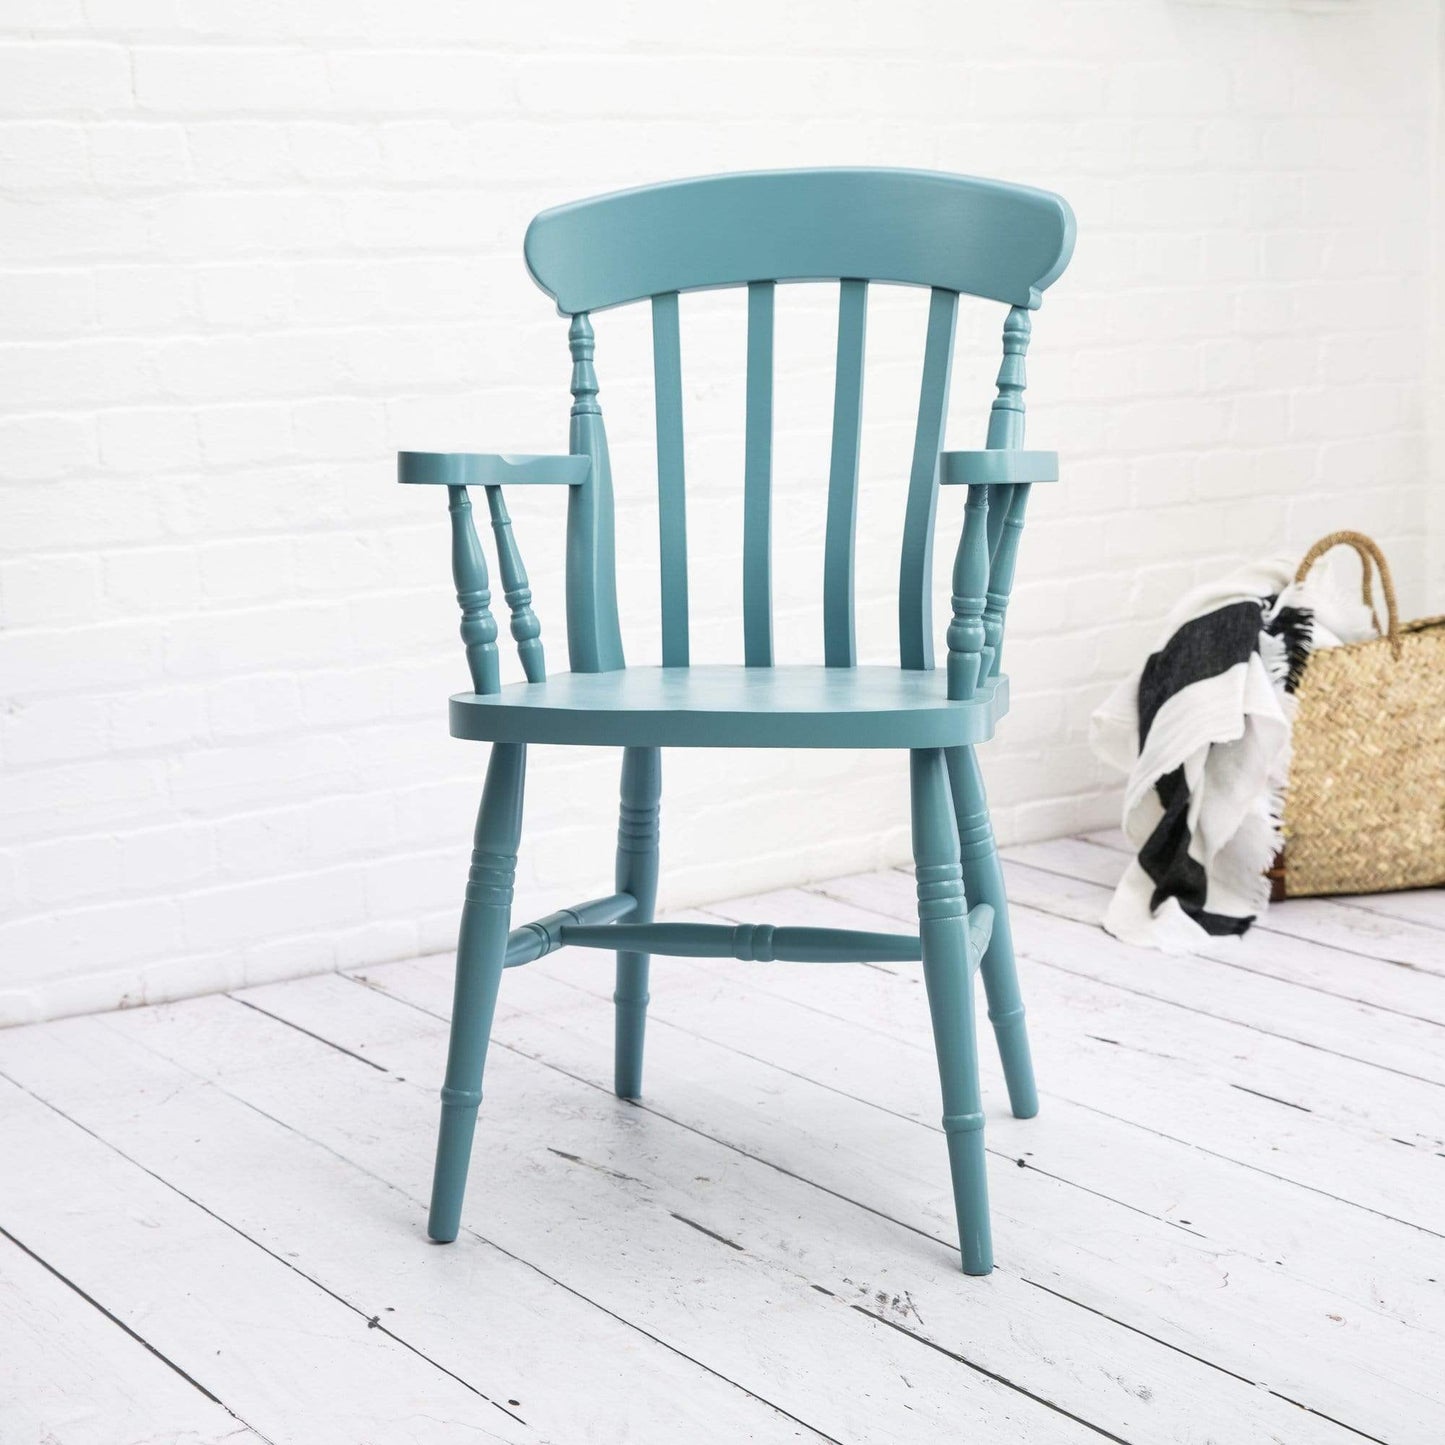 A Kiki Farmhouse Carver Chair adding a touch of interior decor to a white wooden floor in the home.